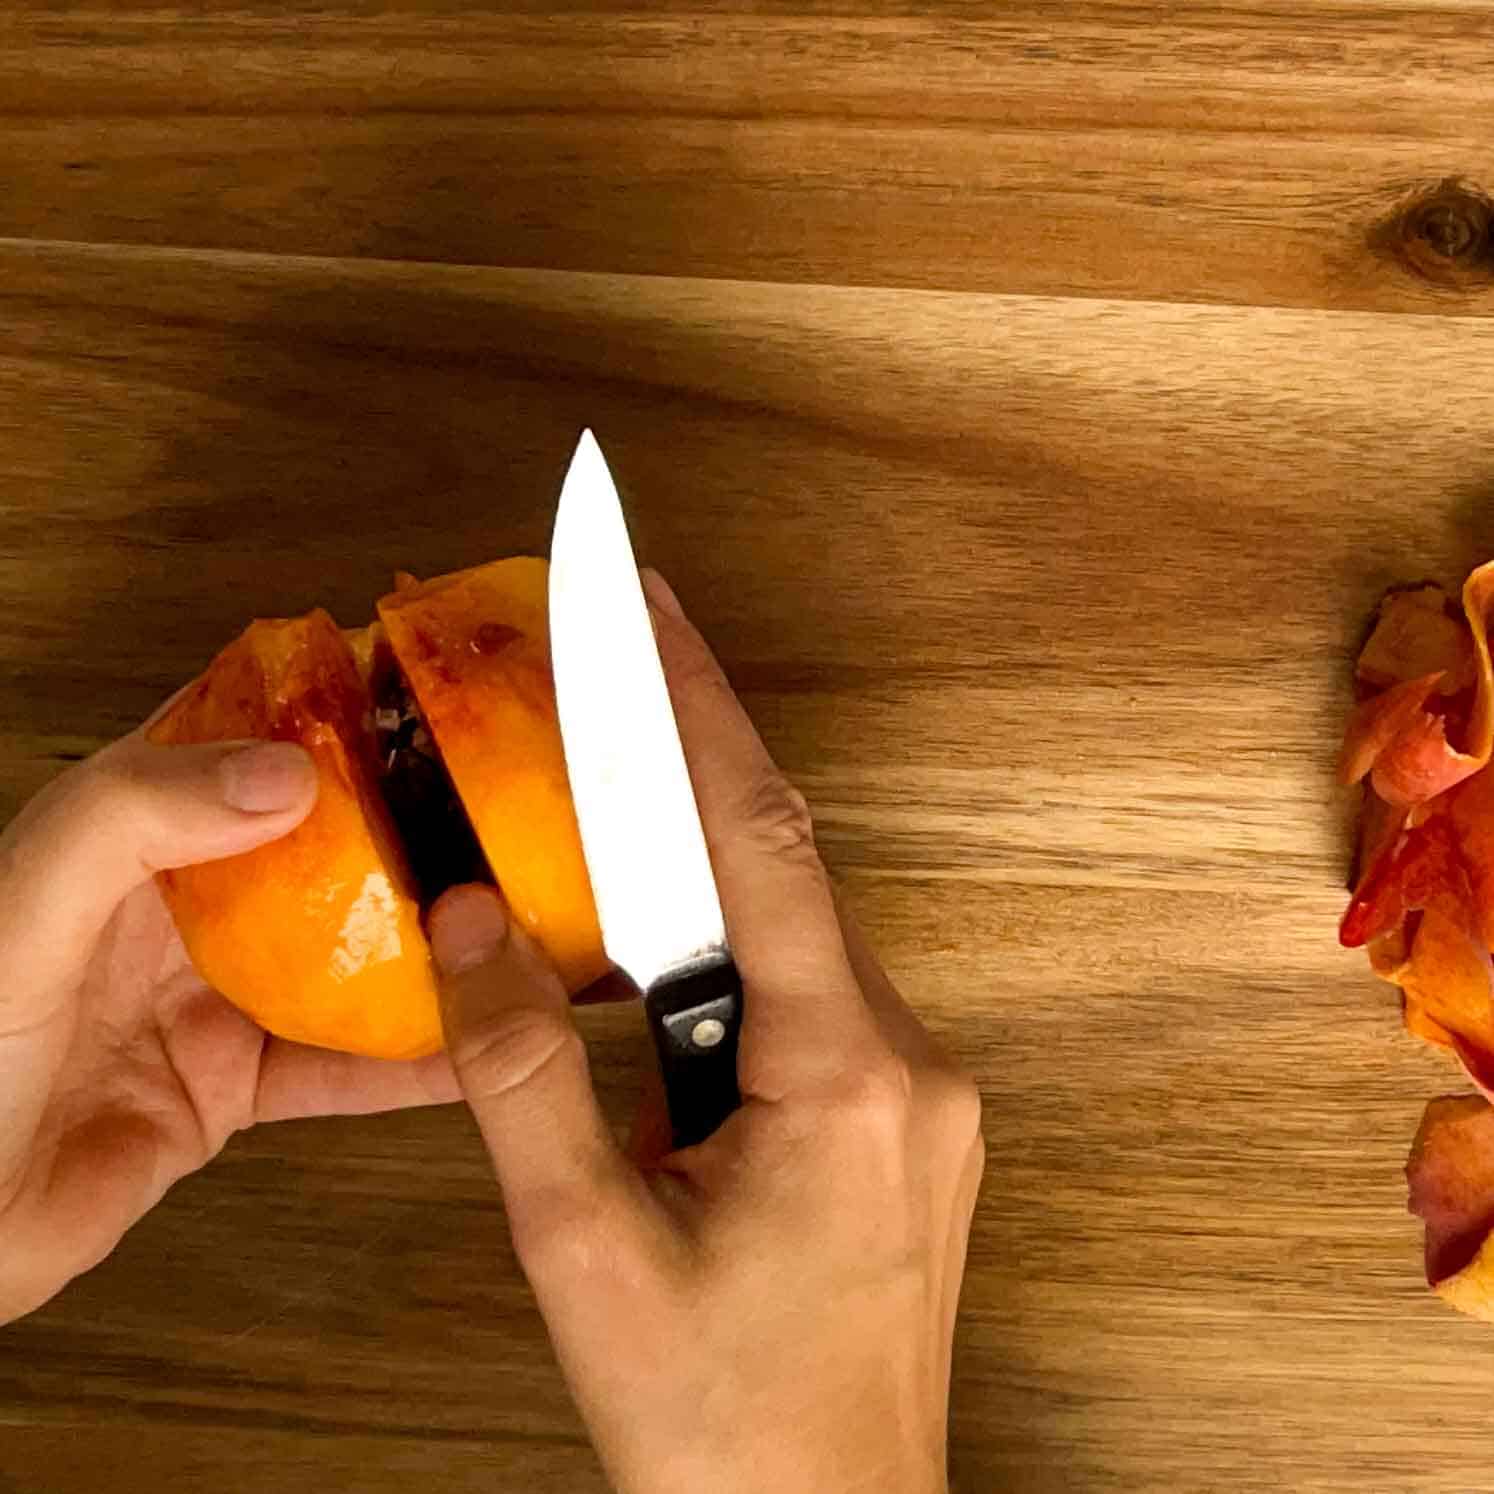 Slicing a peach in half overtop of a wooden cutting board.